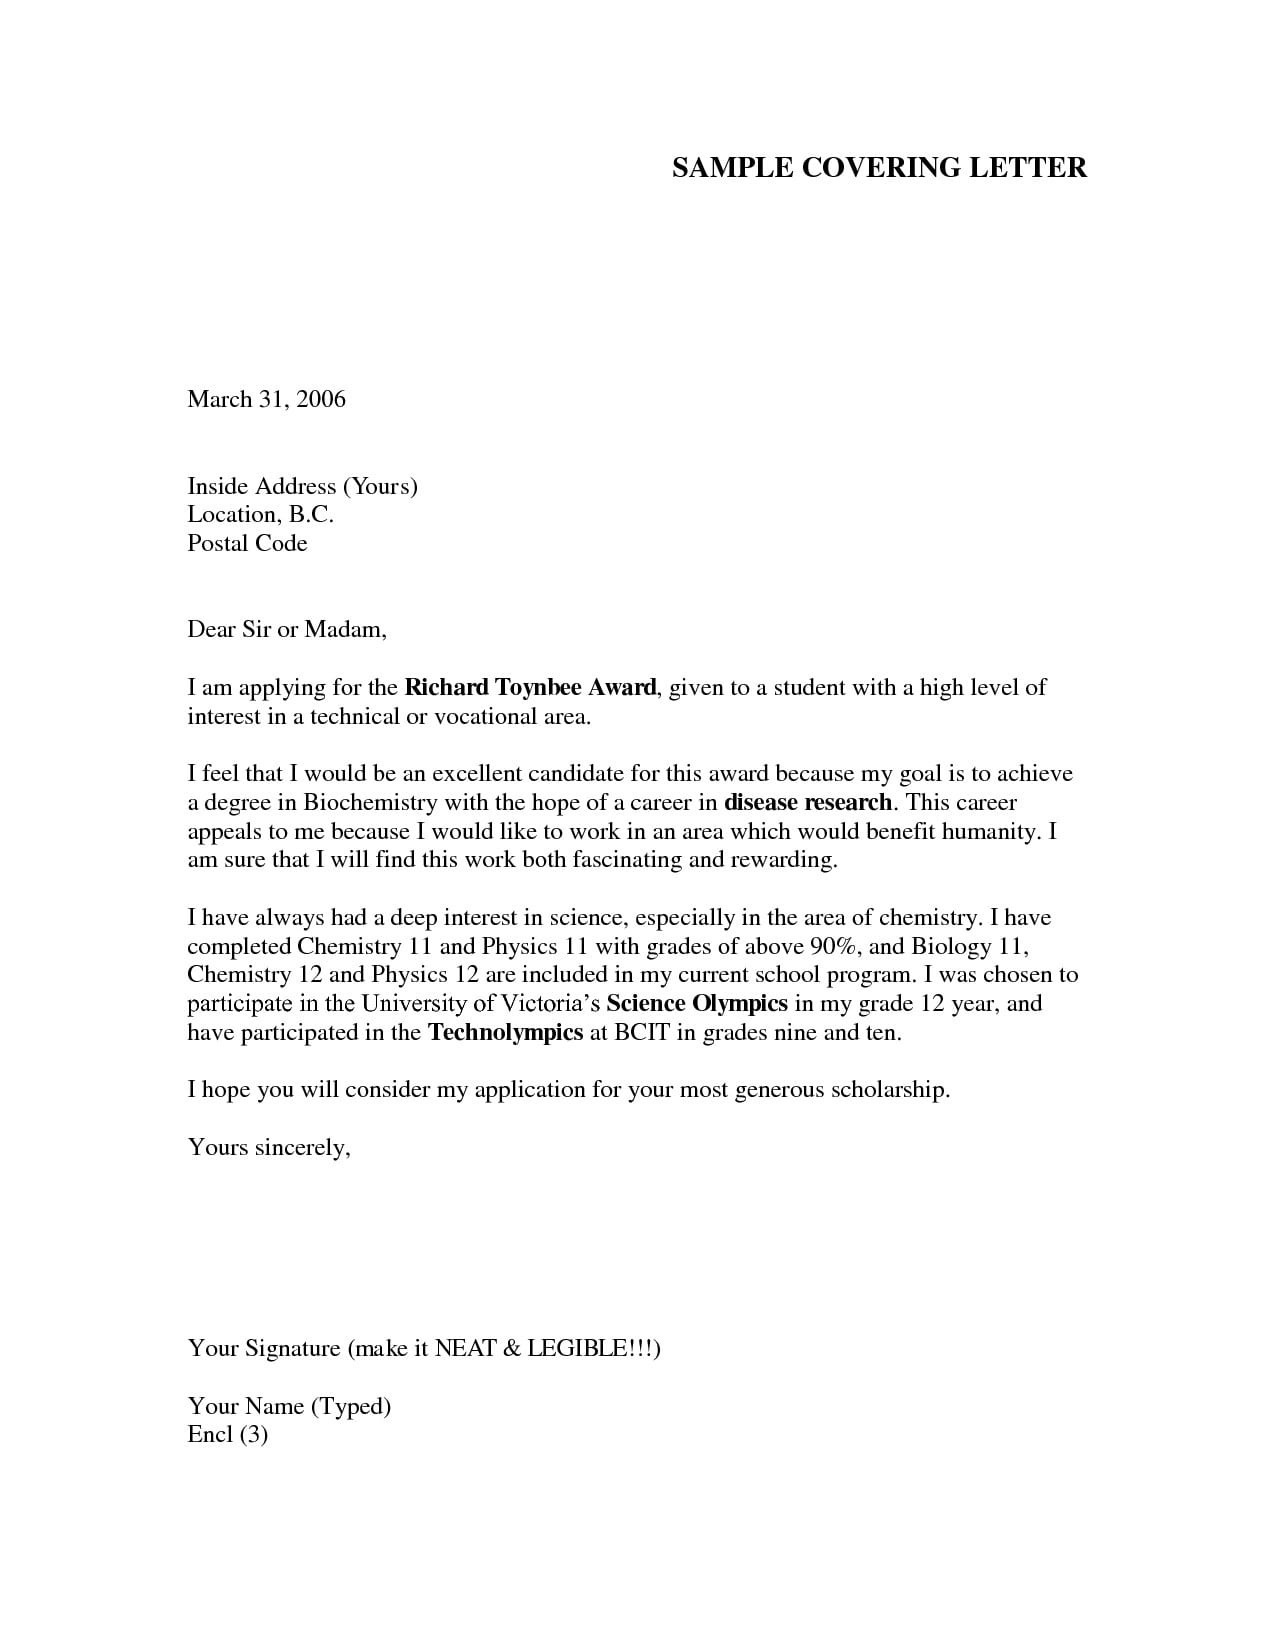 Official Job Application Letter - 9+ Examples, Format, Sample | Examples